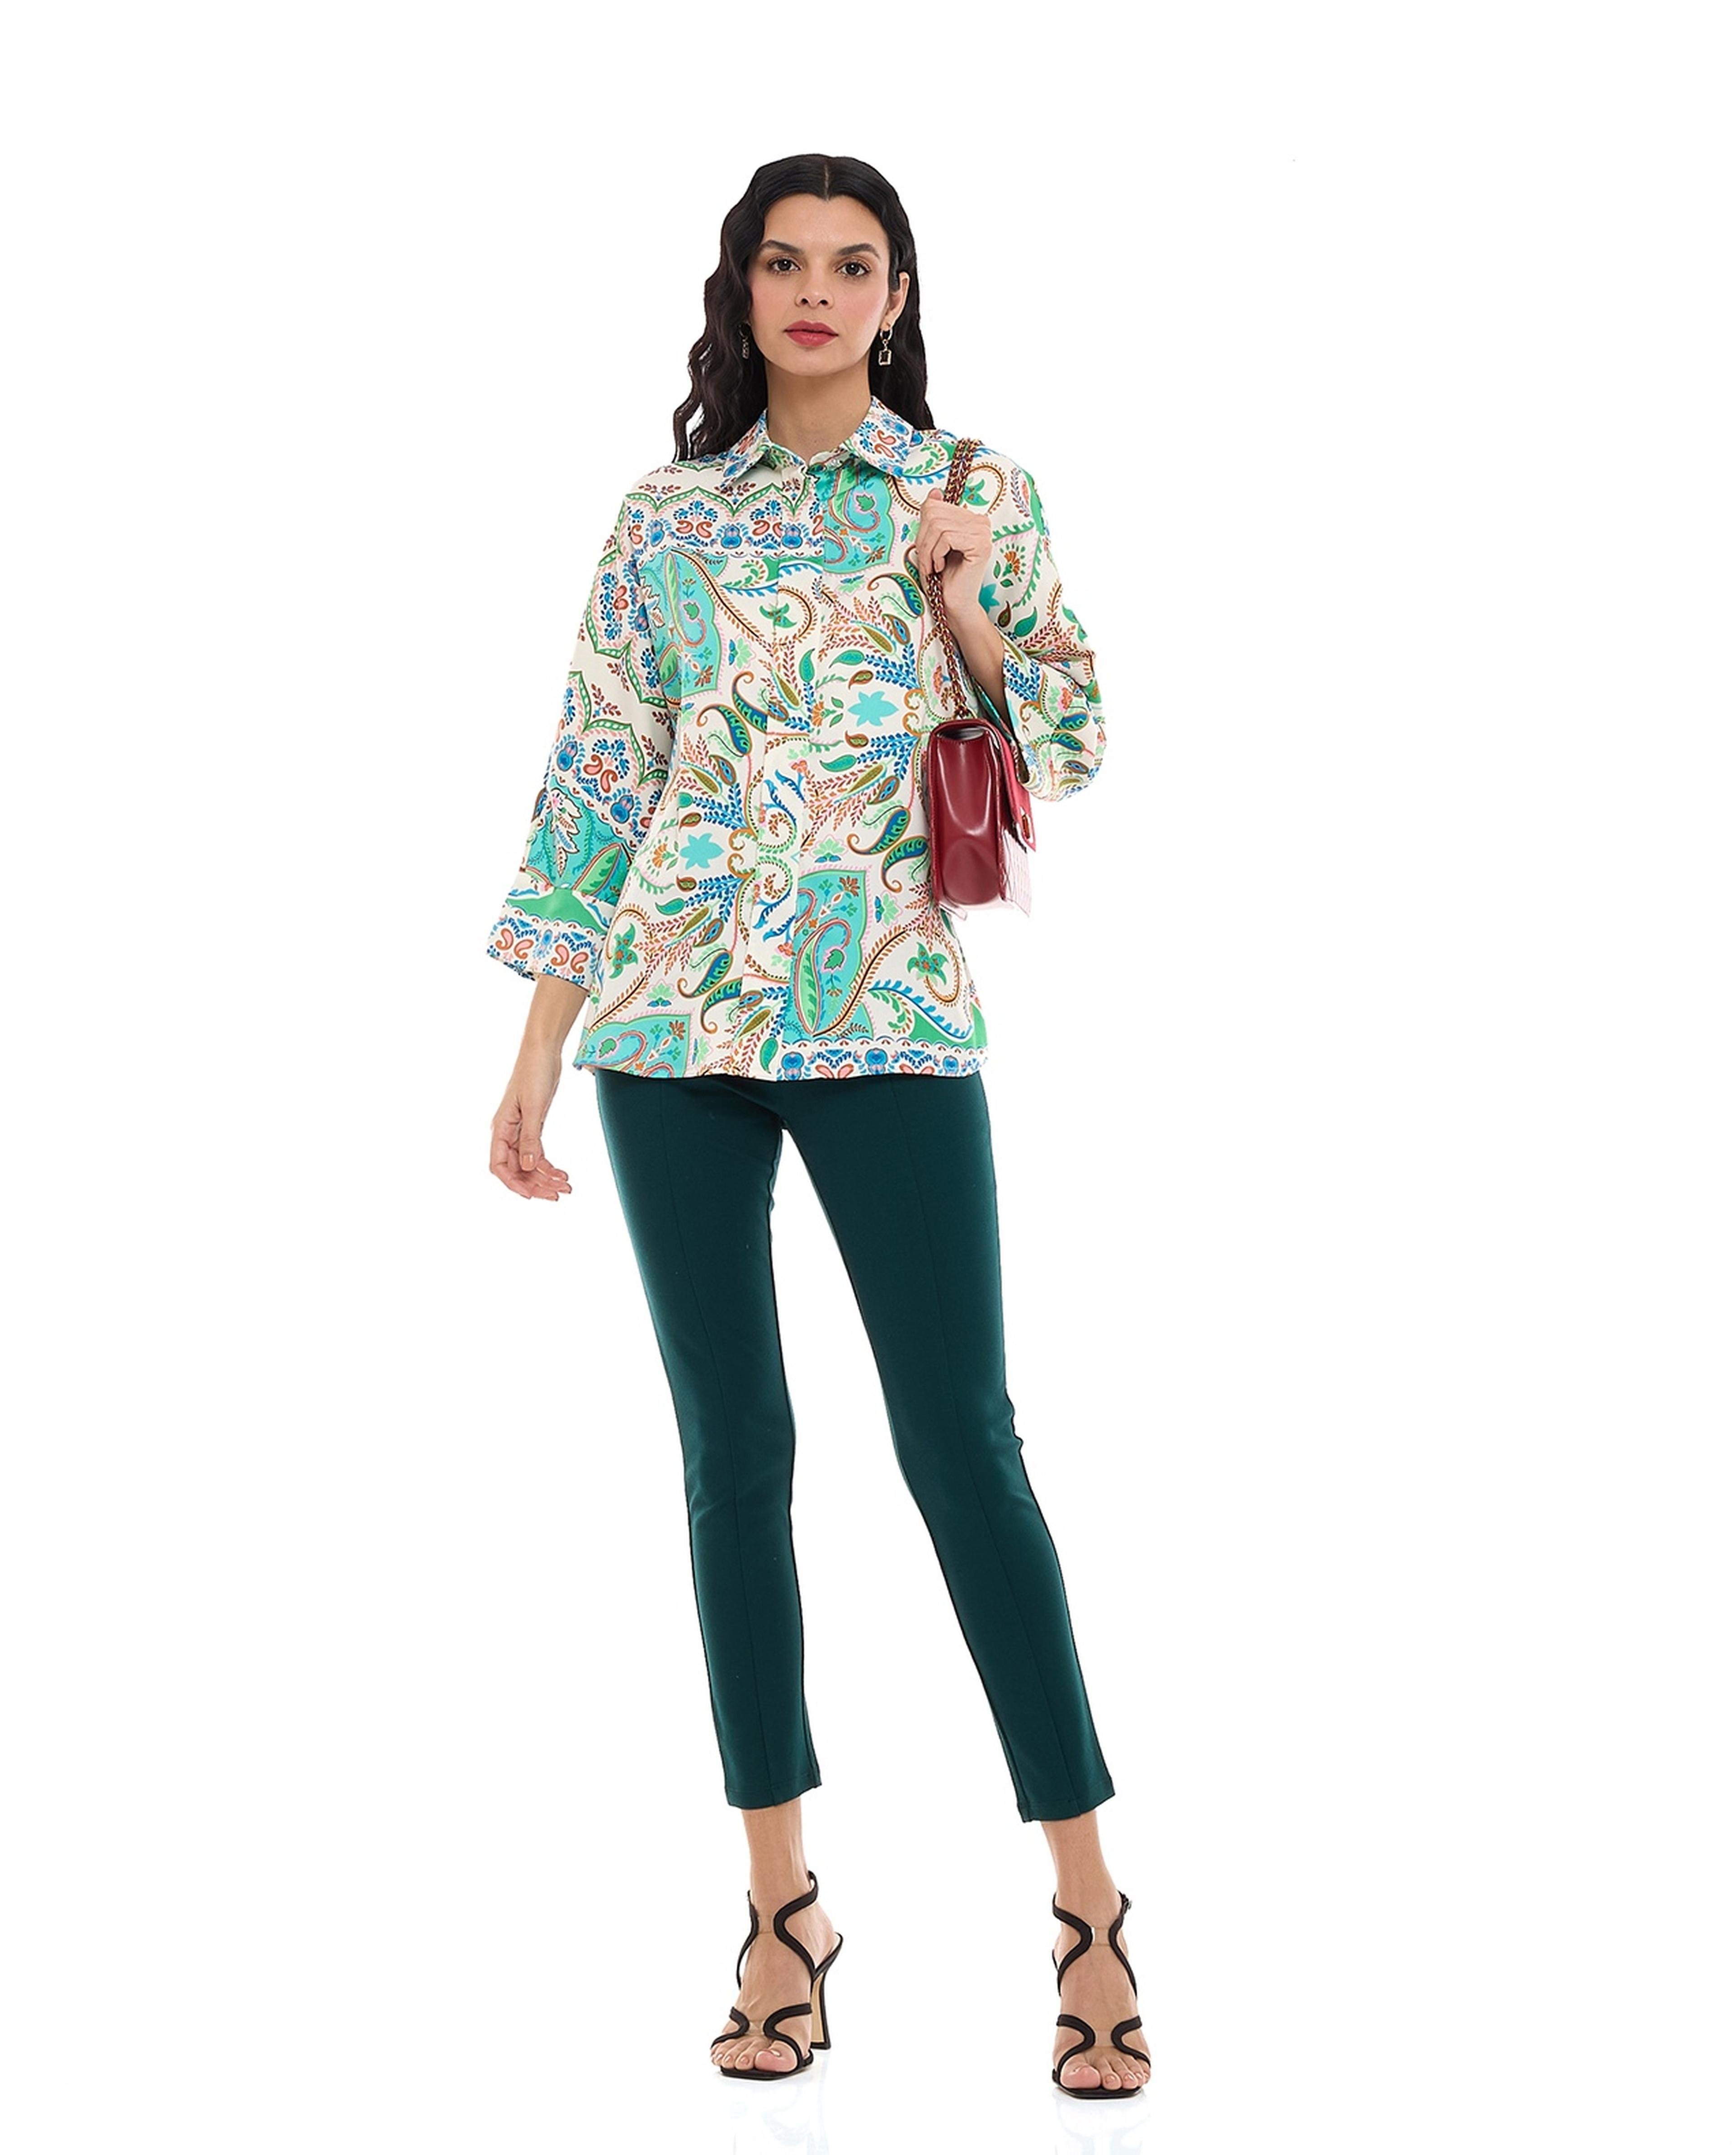 Paisley Patterned Shirt with Classic Collar and Long Sleeves